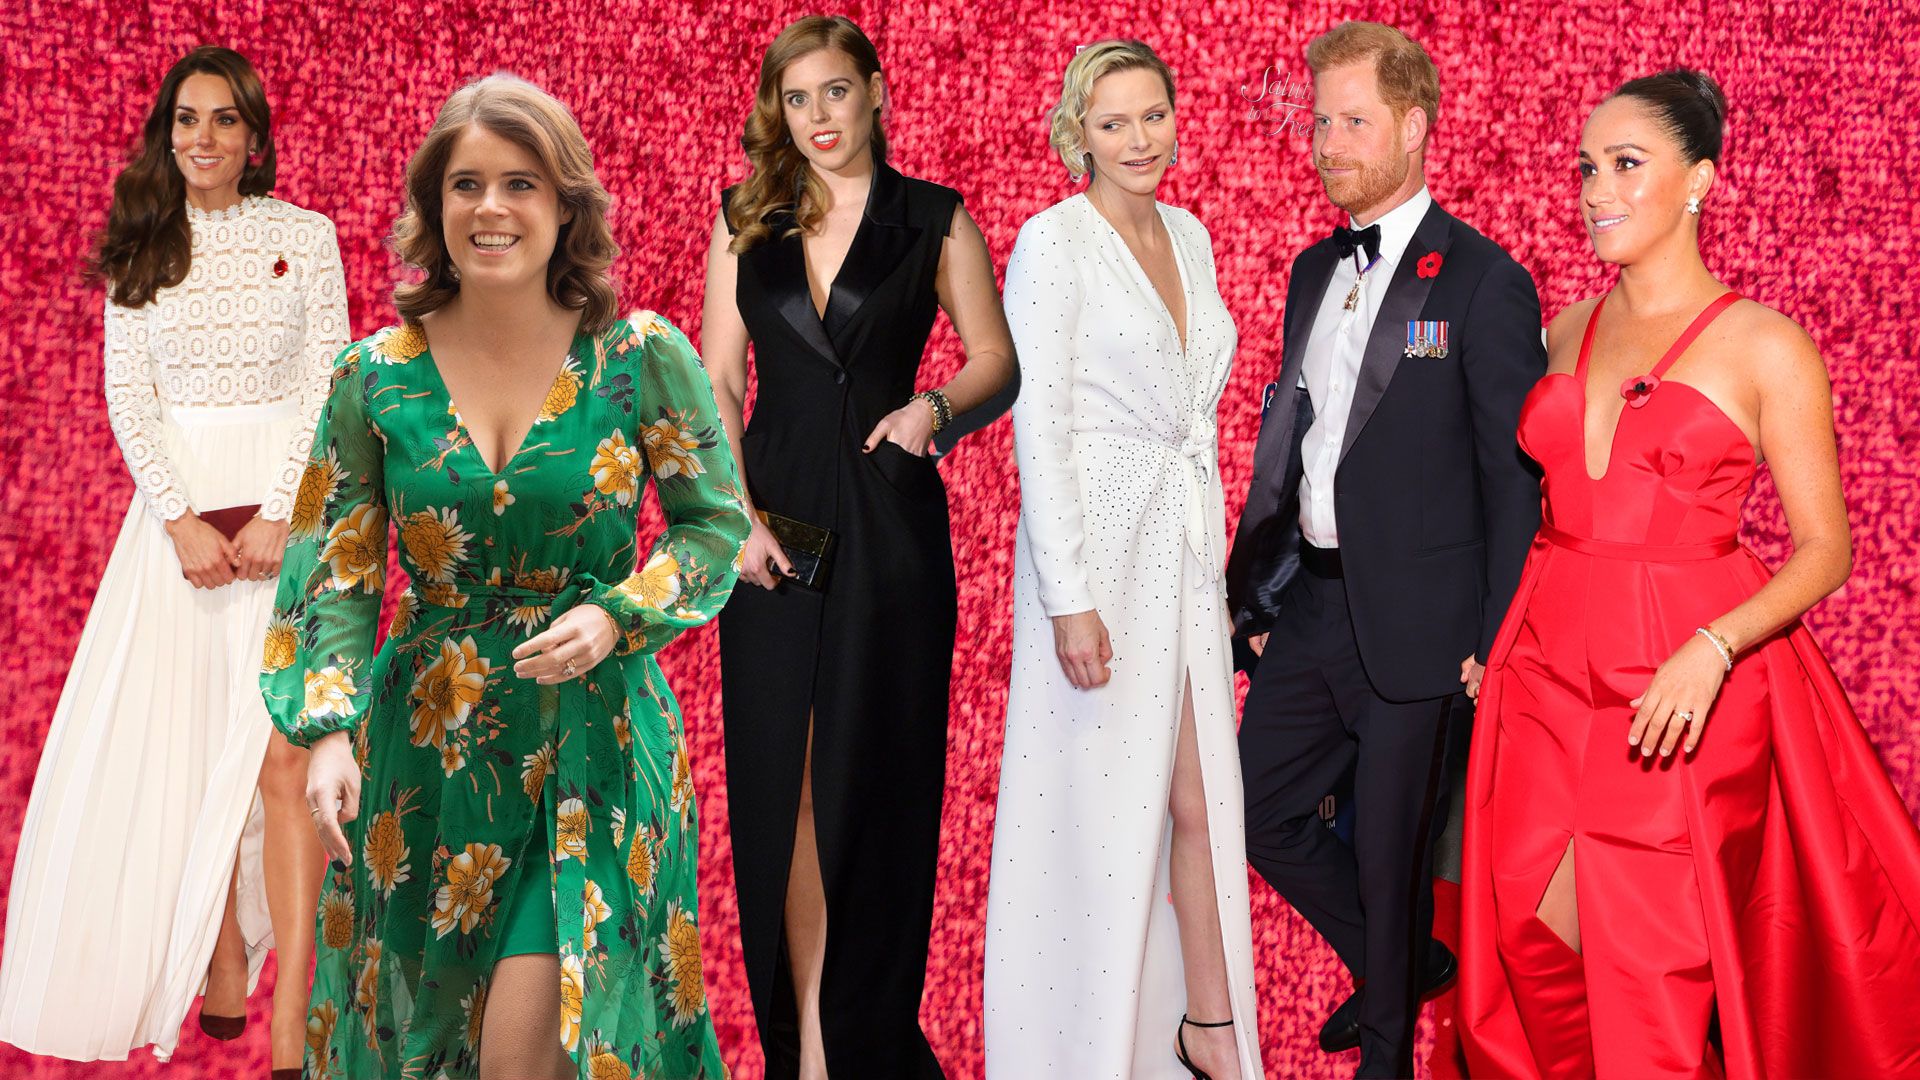 Royal ladies in dazzling split-leg dresses: from Princess Kate's ice queen gown to Duchess Sophie's bold in blue